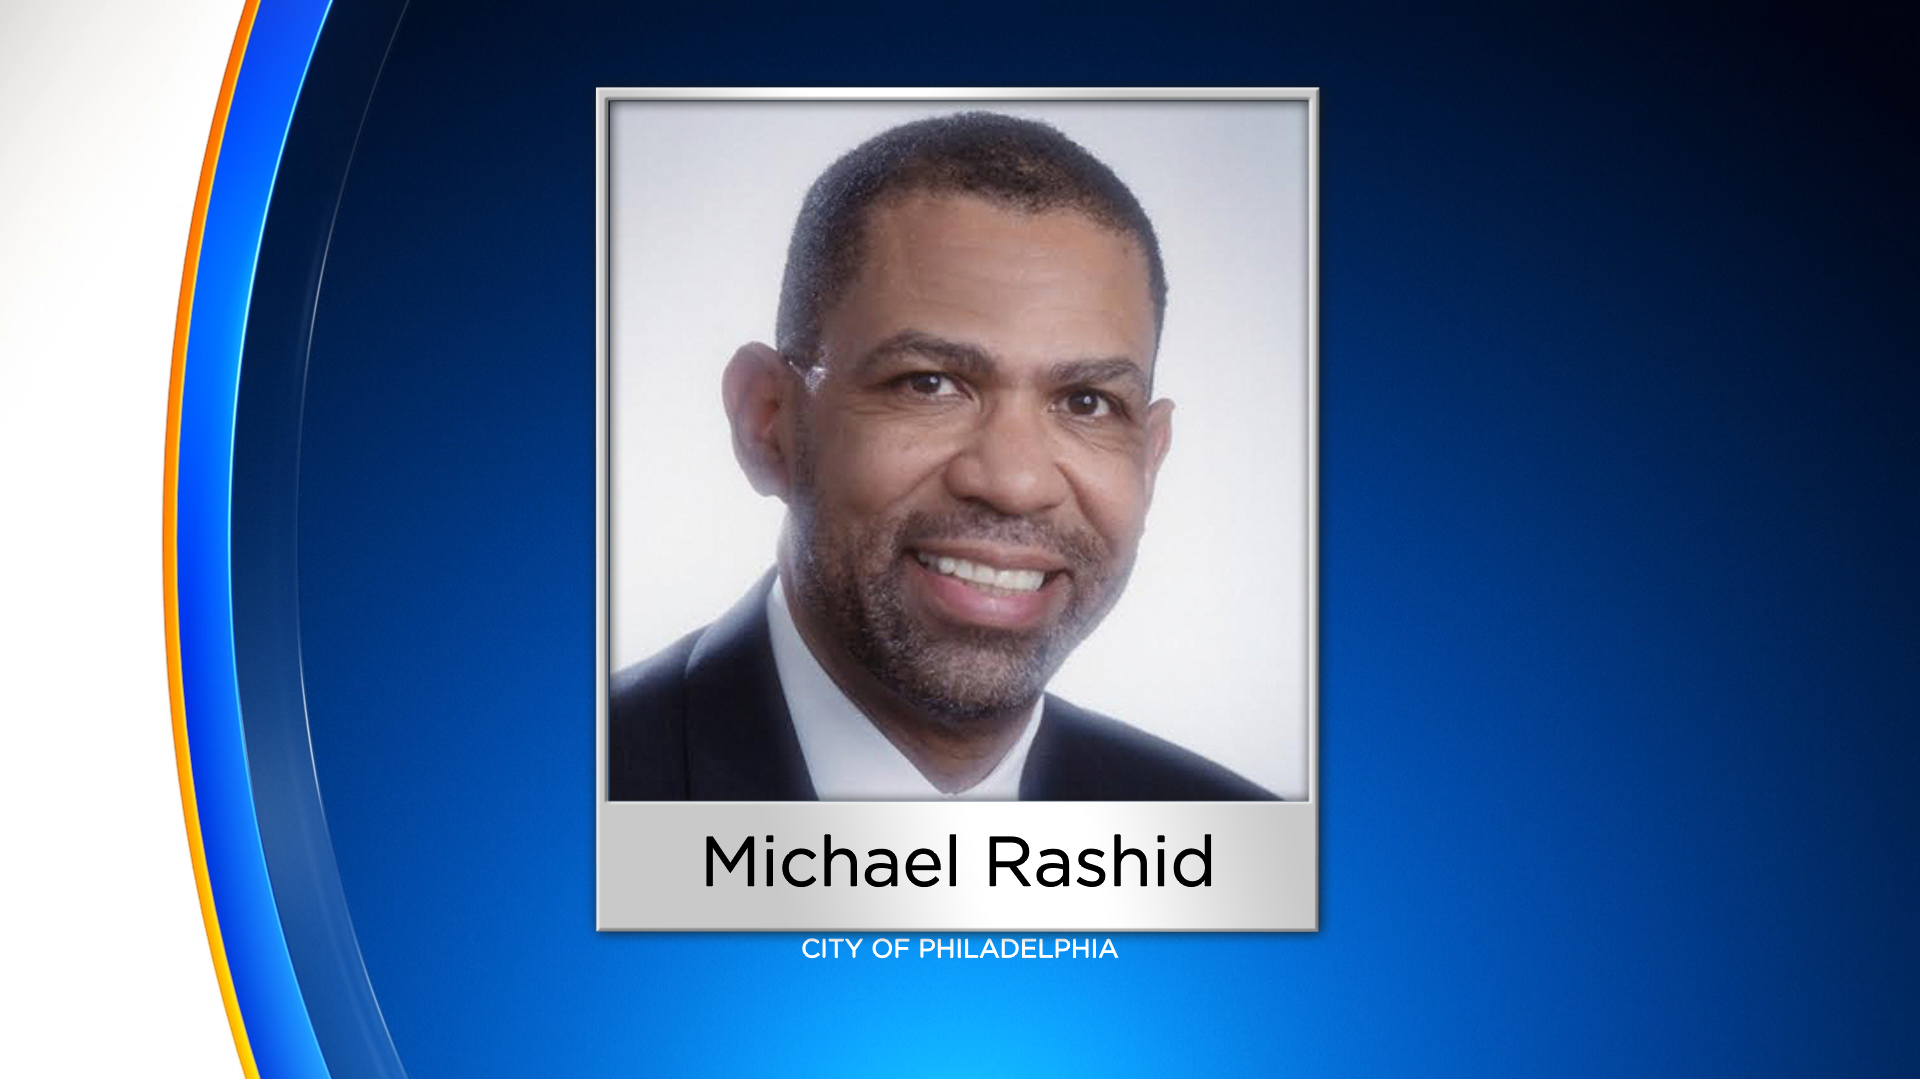 Philadelphia Commerce Director Michael Rashid Resigns After He Reportedly Made Anti-Semitic Remarks, Verbally Abused His Staff